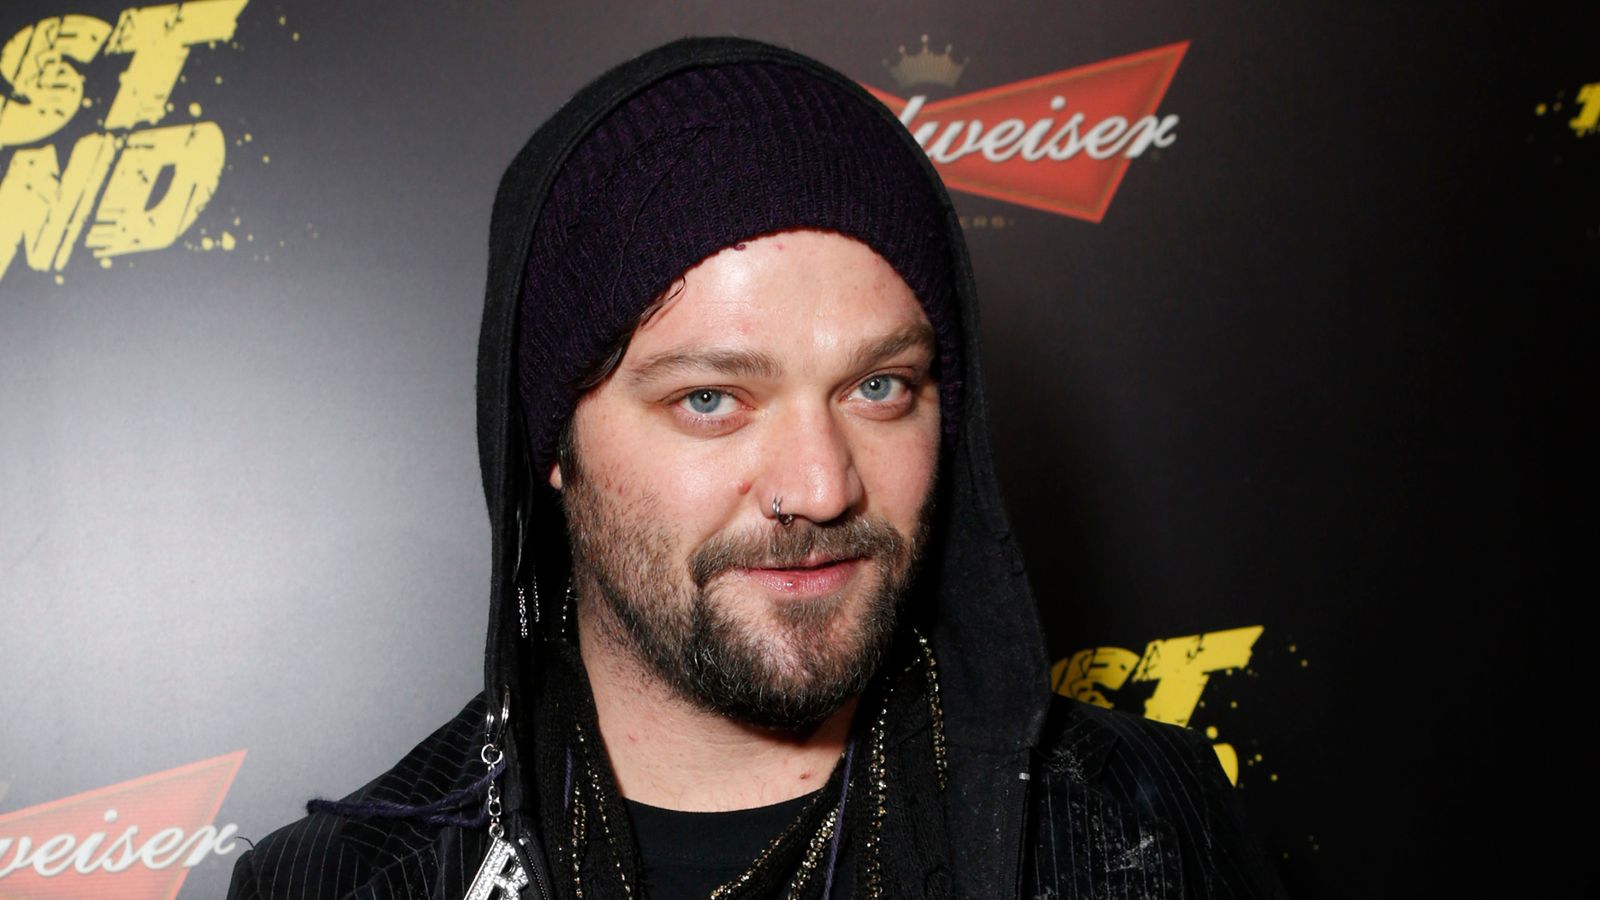 Jackass star Bam Margera wanted by police